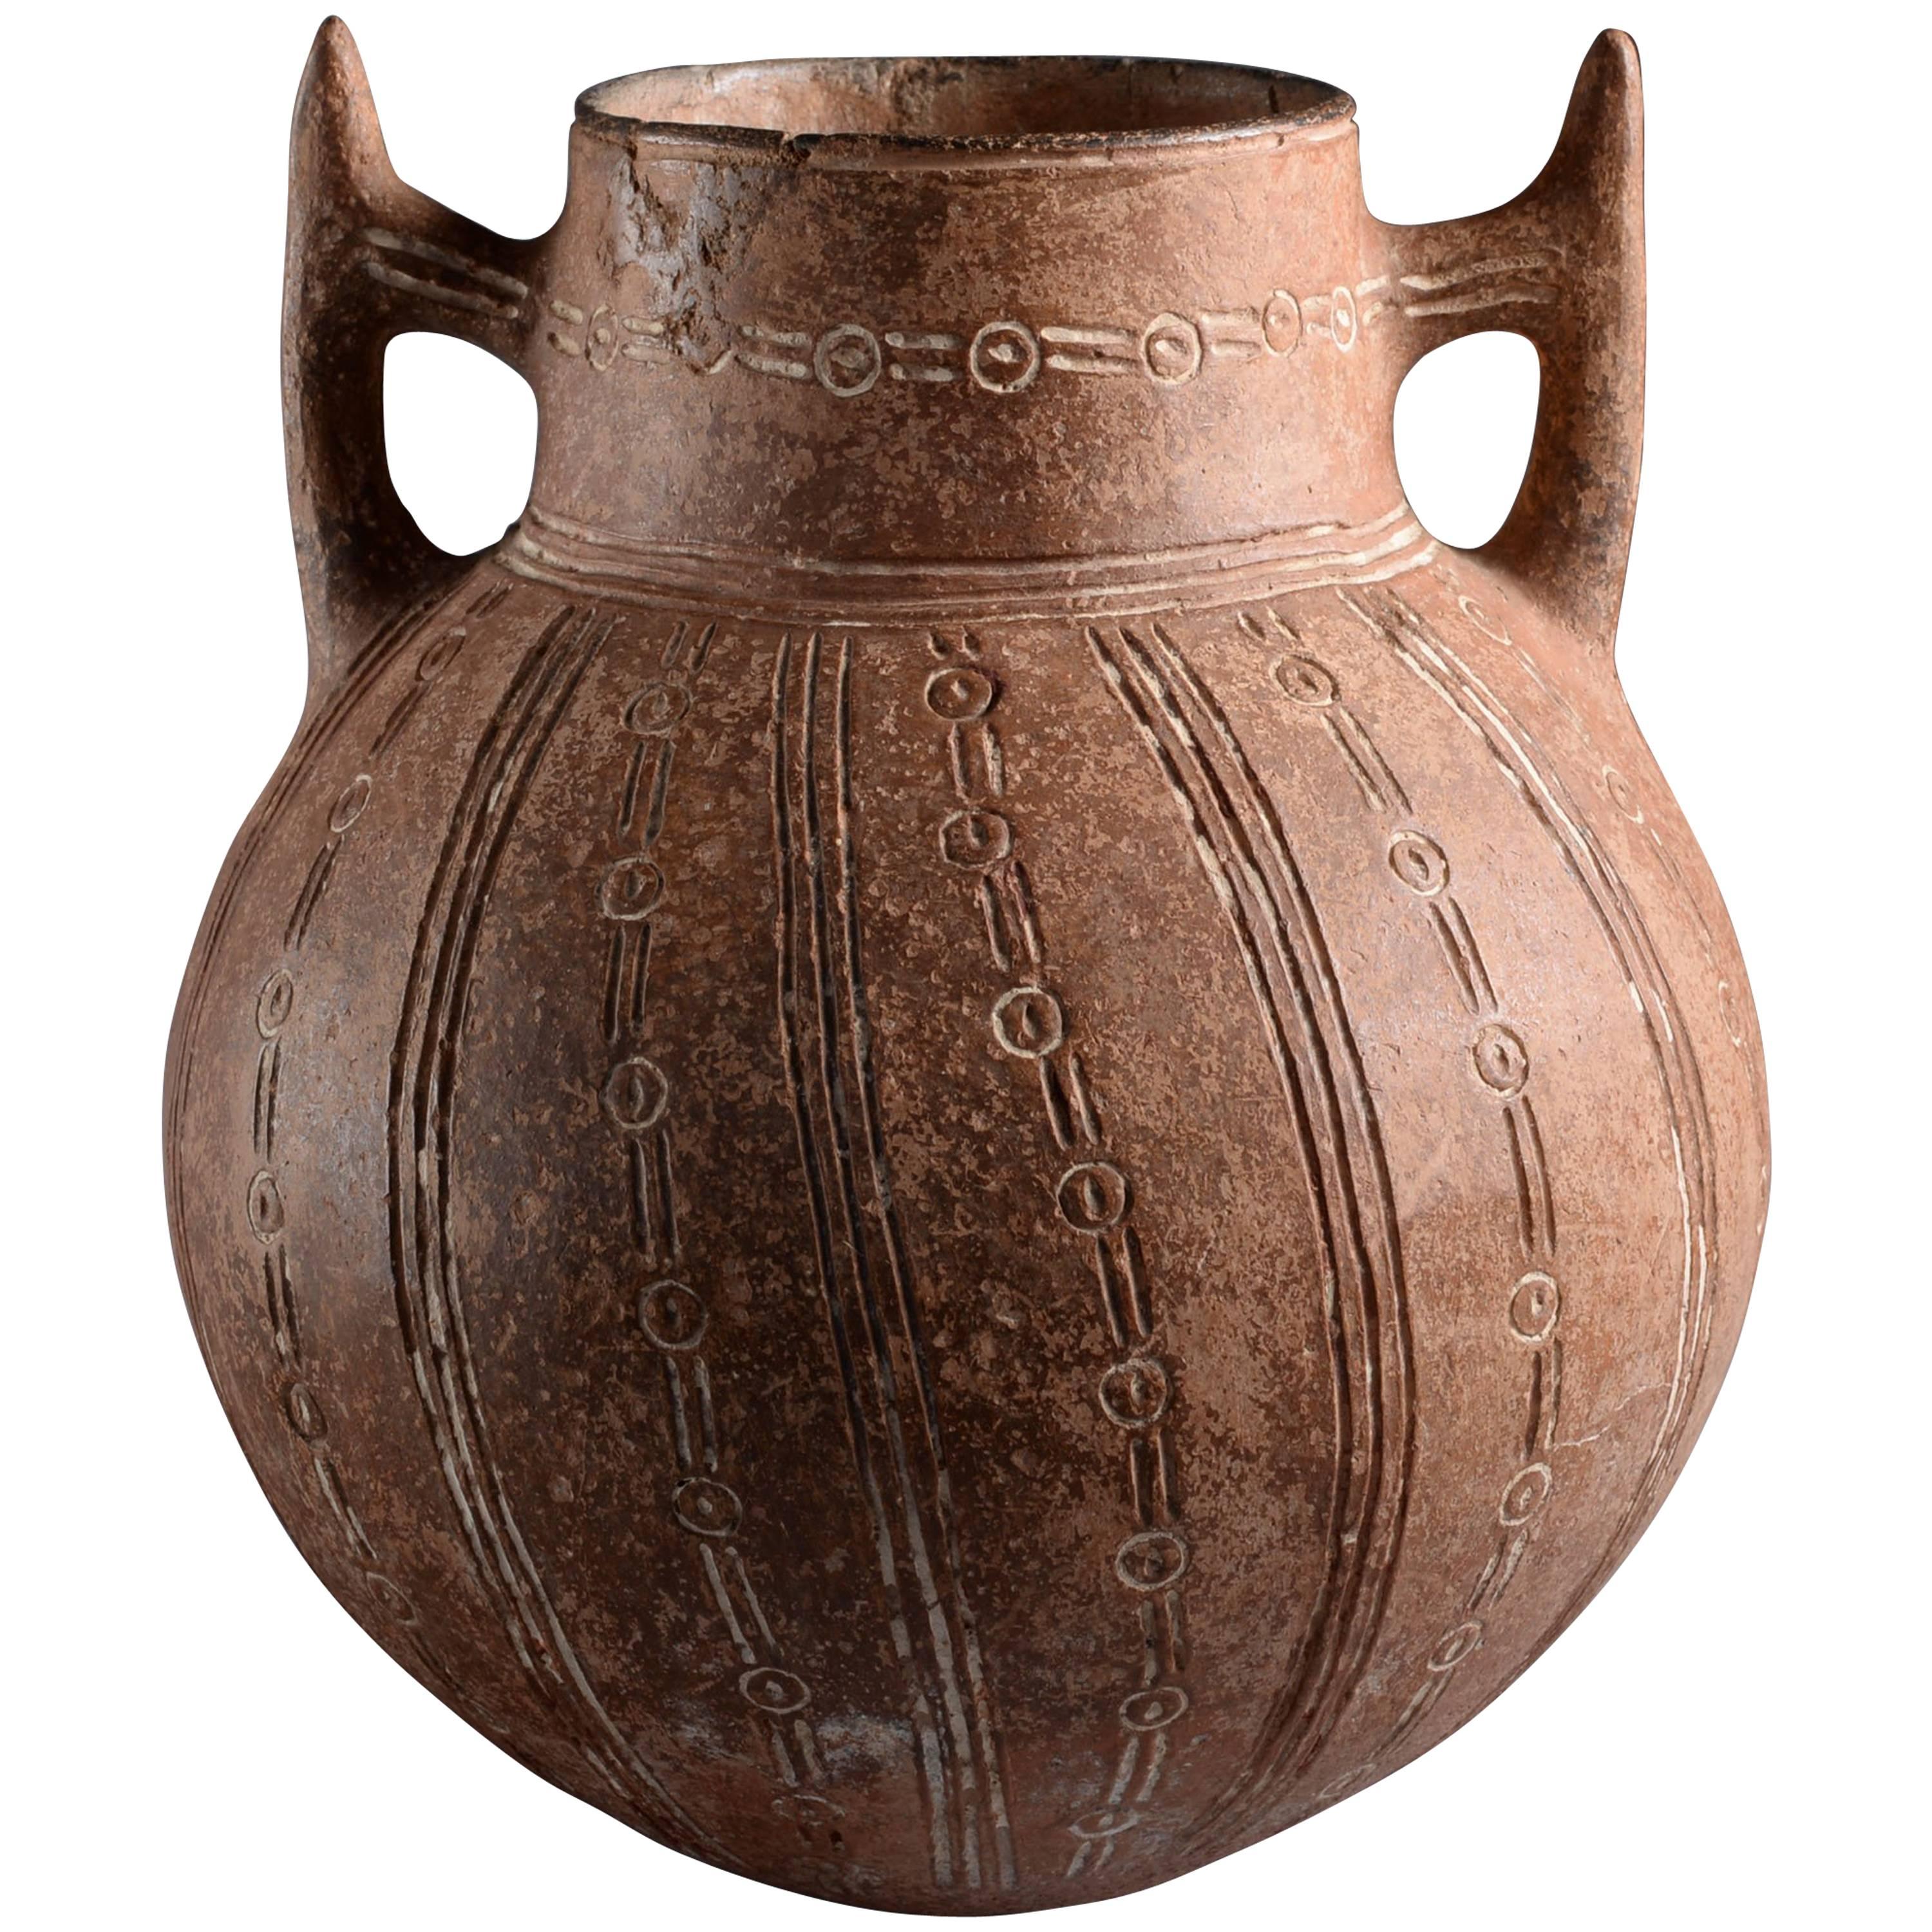 Ancient Cypriot Middle Bronze Age Bull Jug, 1900 BC